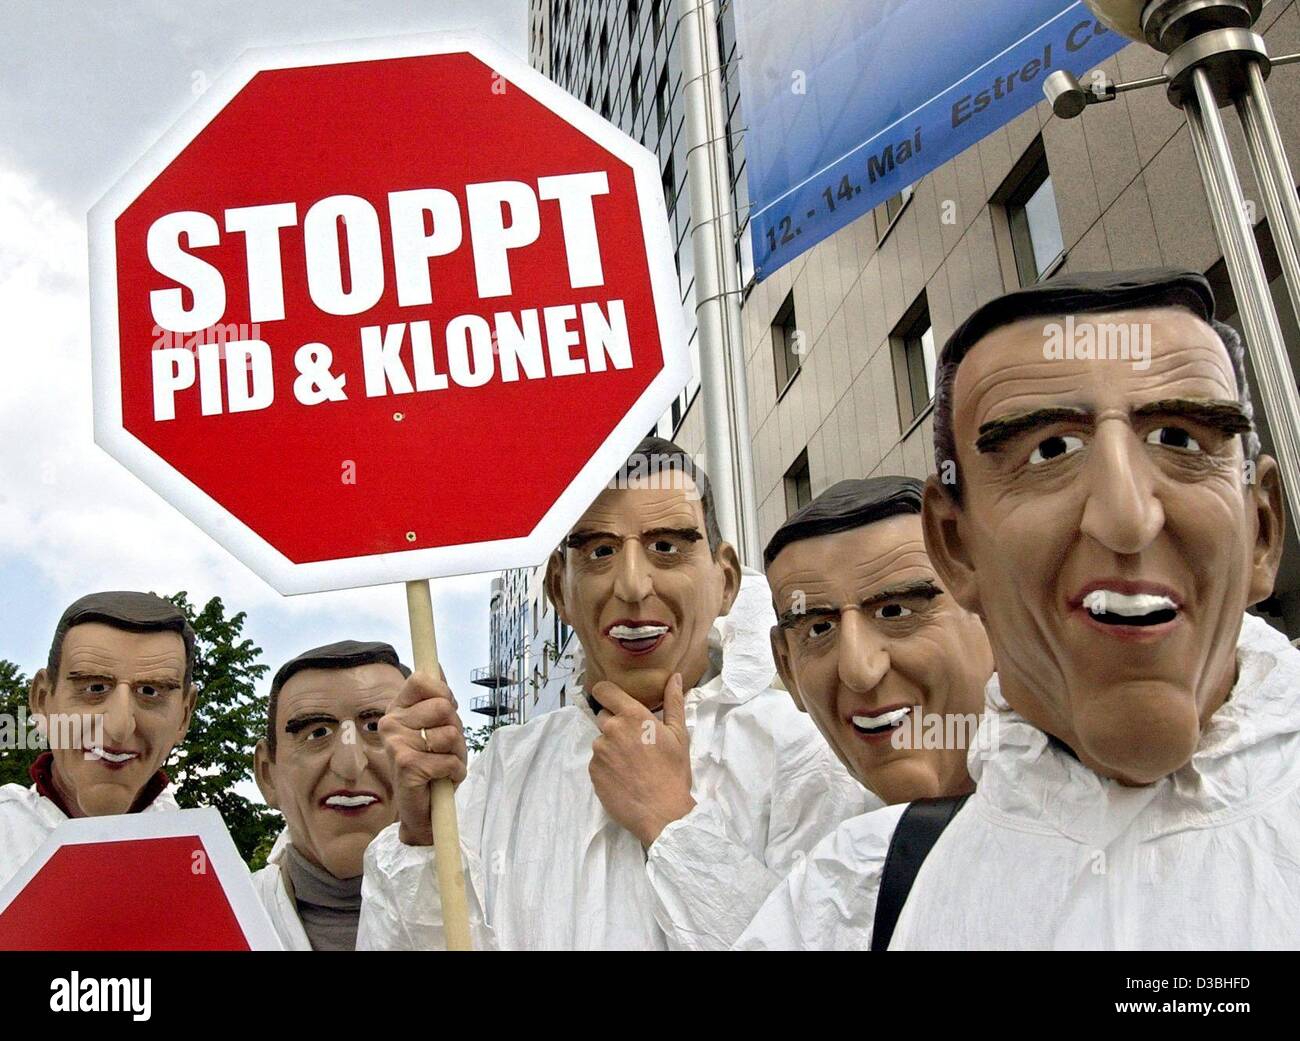 (dpa) - Portesters wear masks resembling German Chancellor Gerhard Schroeder and carry symbolic stop signs which read 'Stop PID and Cloning' in protest of a conference on cloning in Berlin, 14 May 2003. The protesters rallied against the cloning of humans and the artificial selection through preimpl Stock Photo